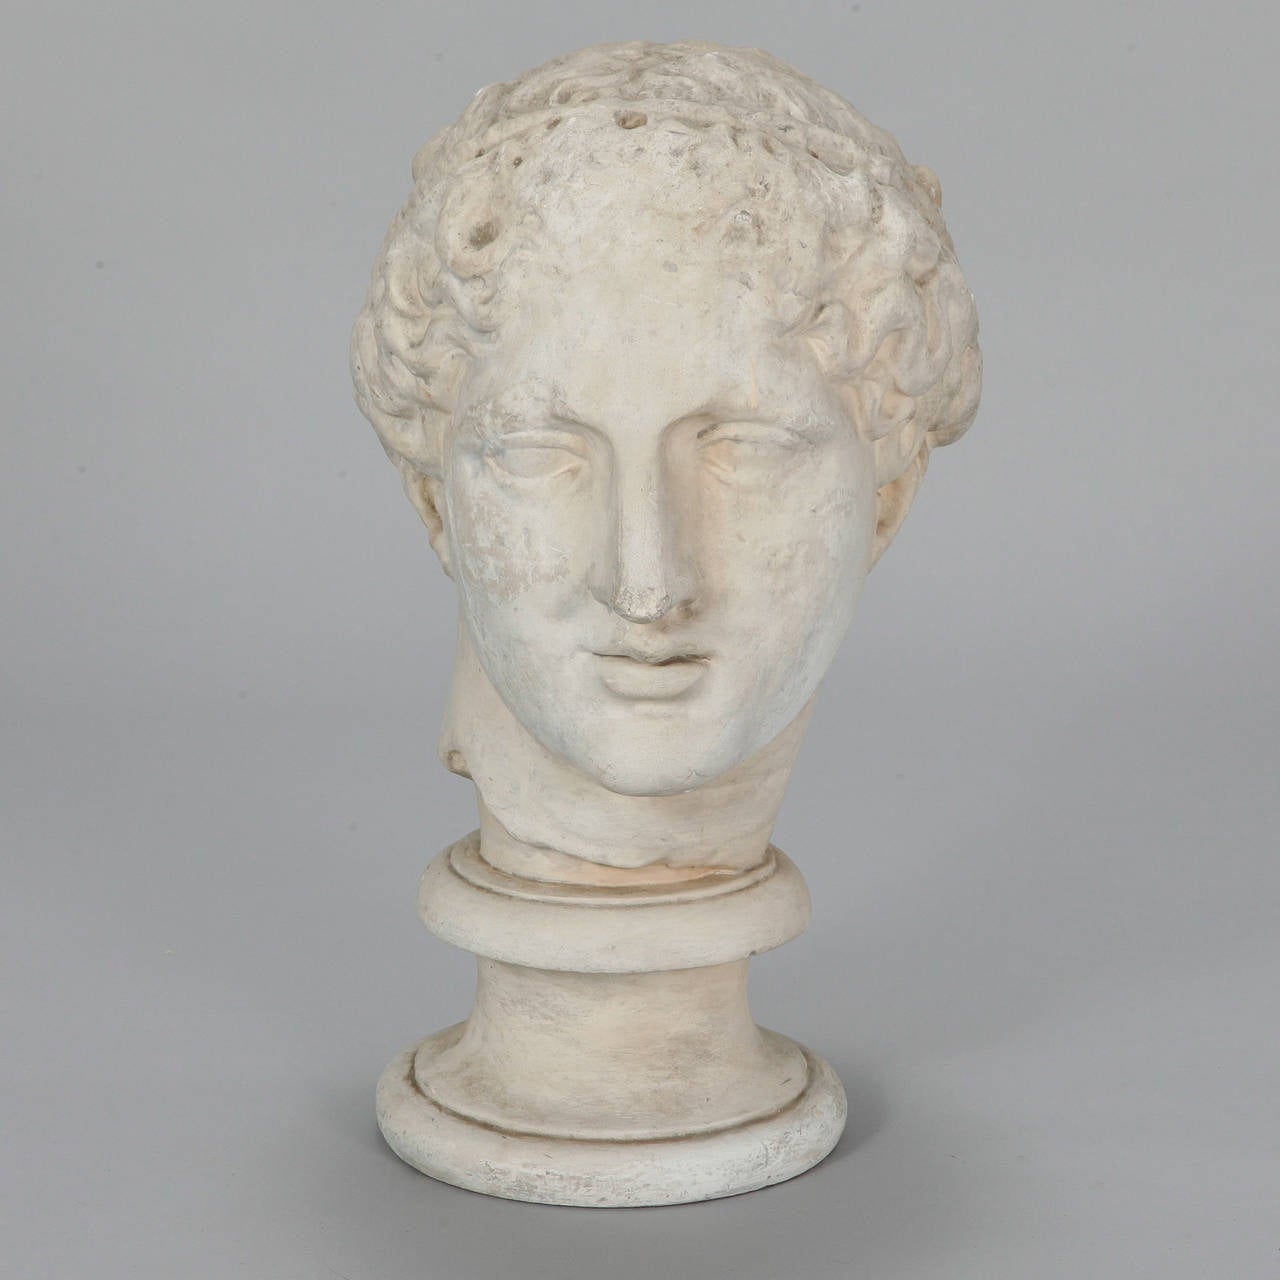 Circa 1960s classic plaster bust of a young Julius Caeser with attached base / stand.